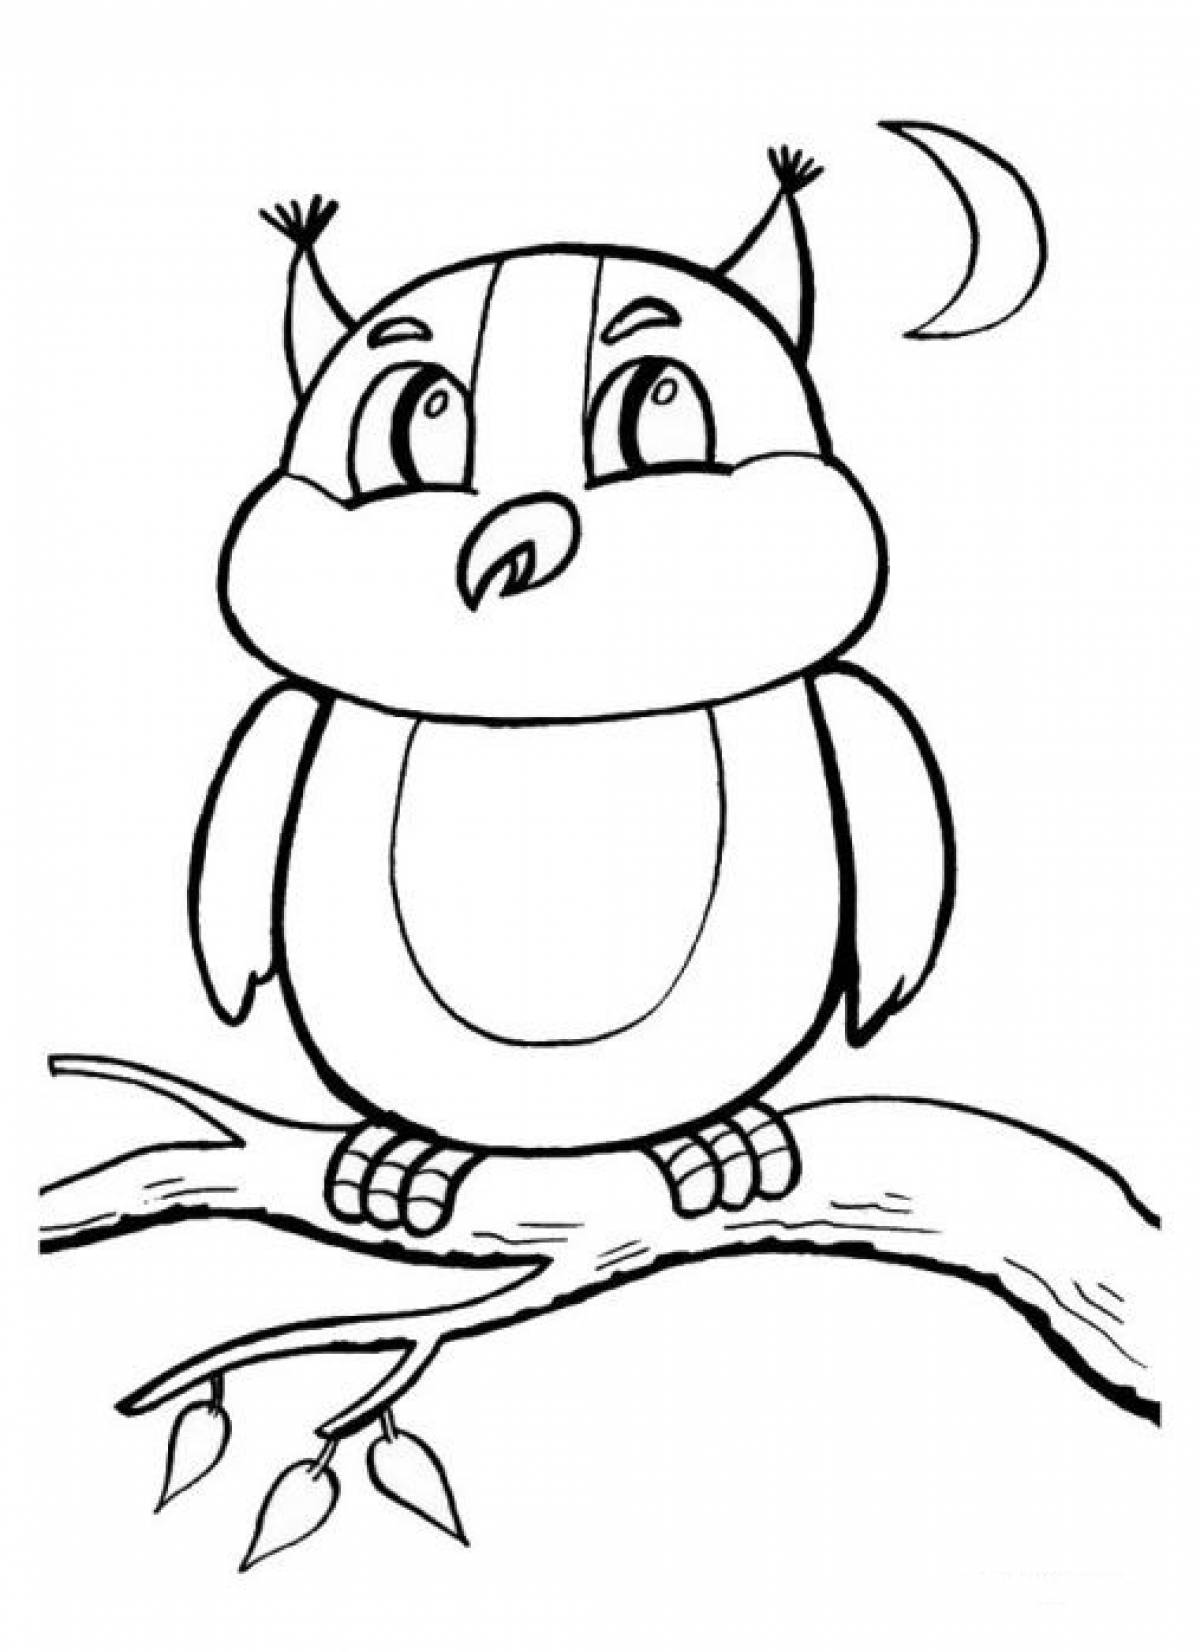 Owl on a branch coloring book